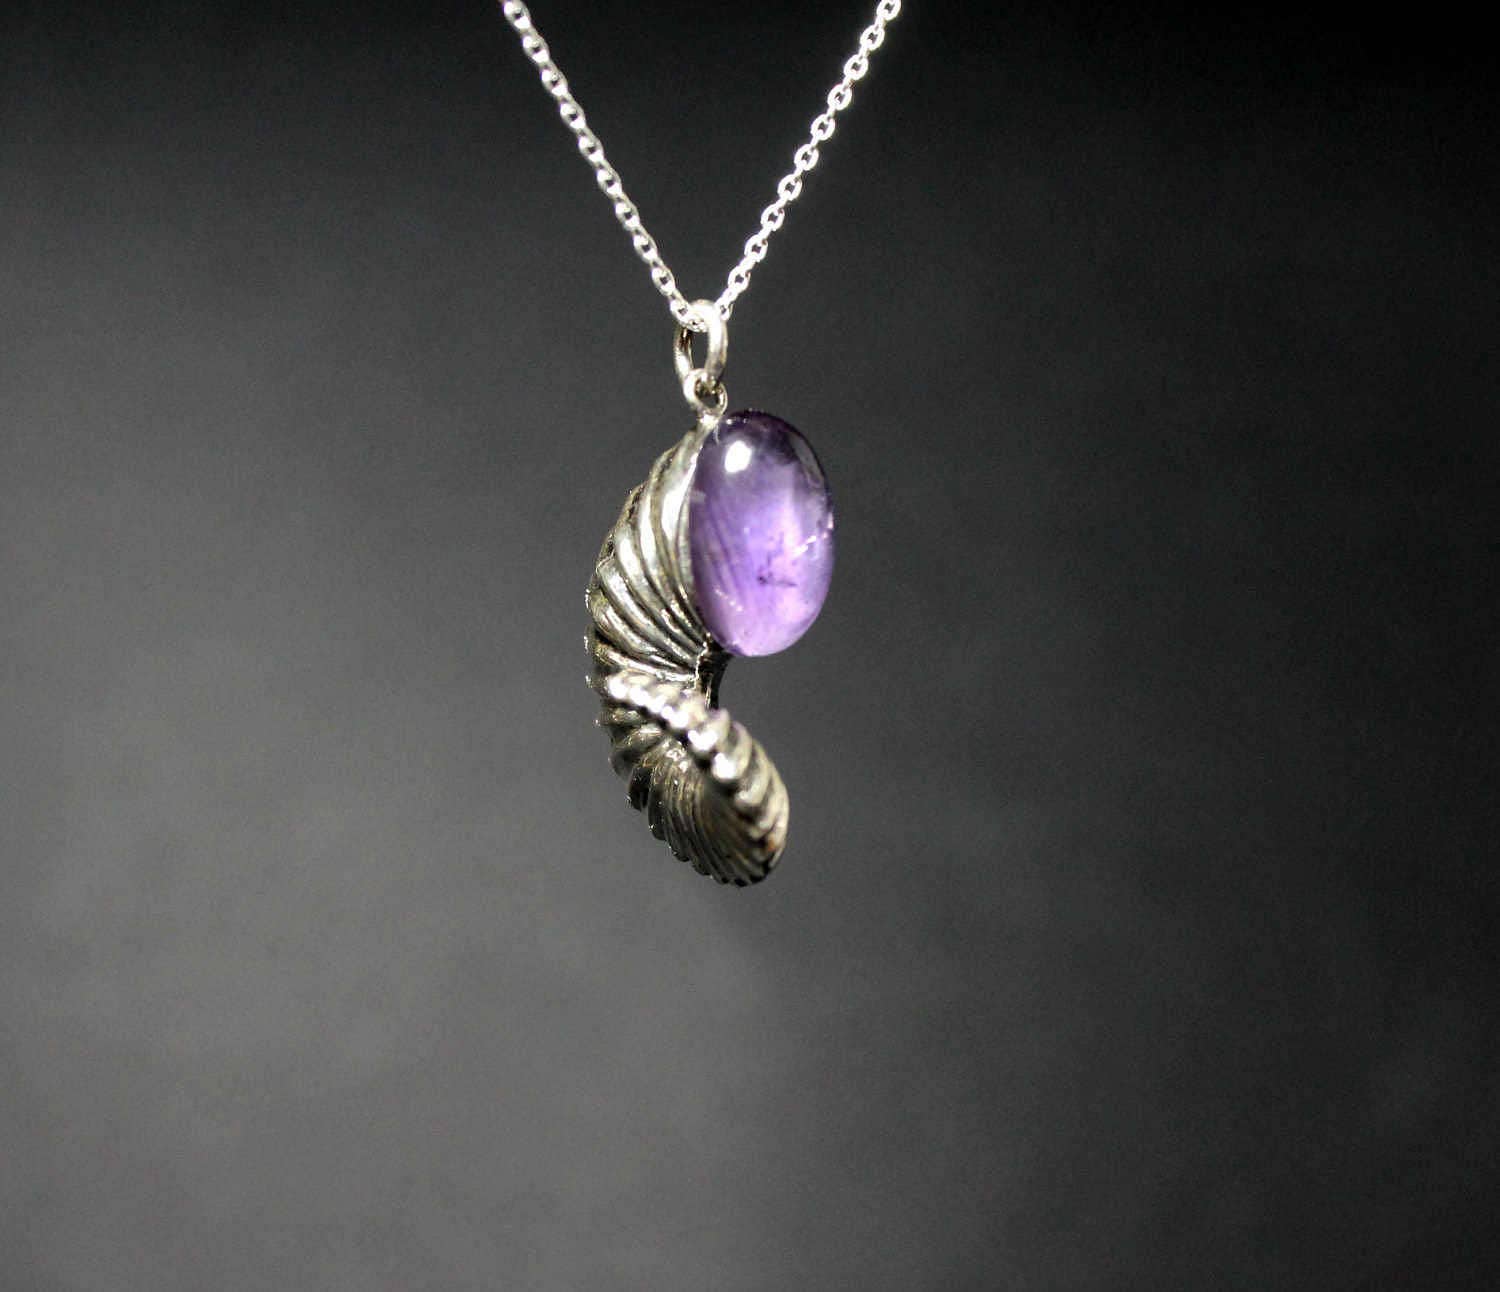 Aries Zodiac Jewelry, Ram Horn Necklace Aries Symbol With Amethyst Stone Sterling Silver Unique Creation